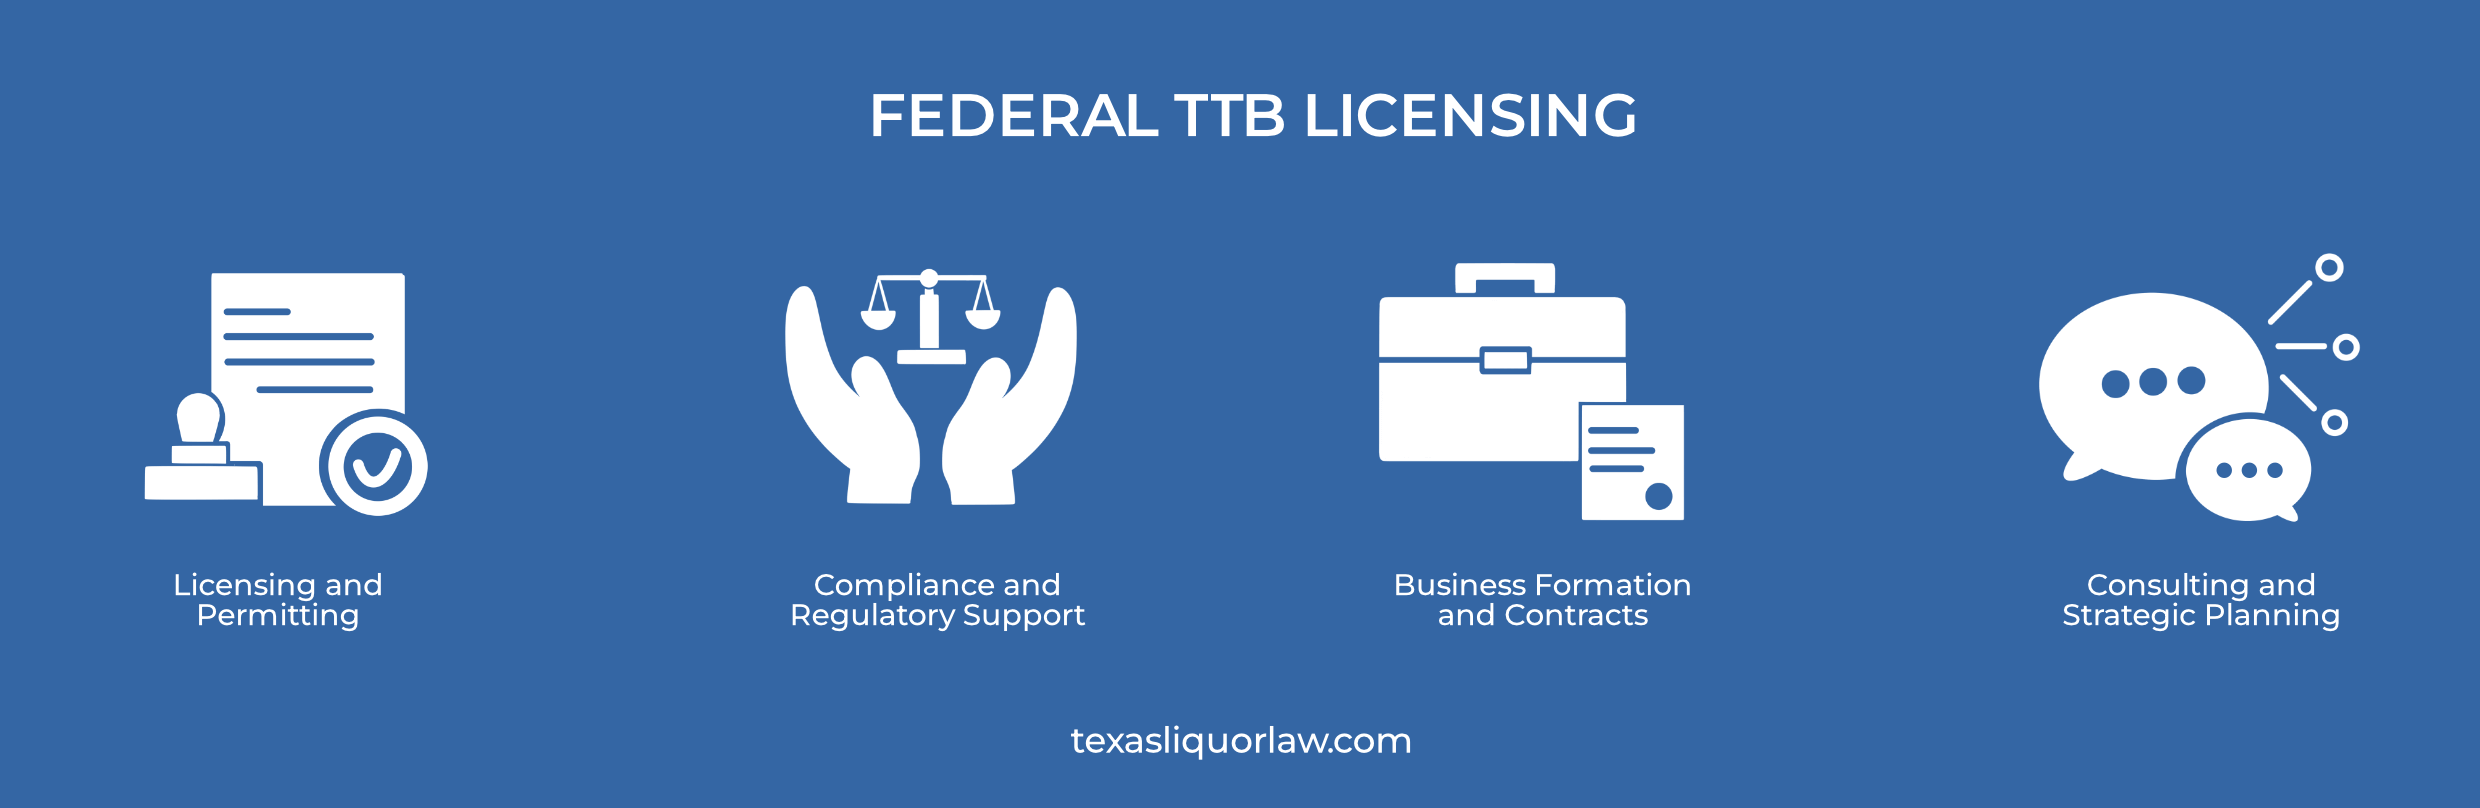 Federal TTB Licensing and Permitting